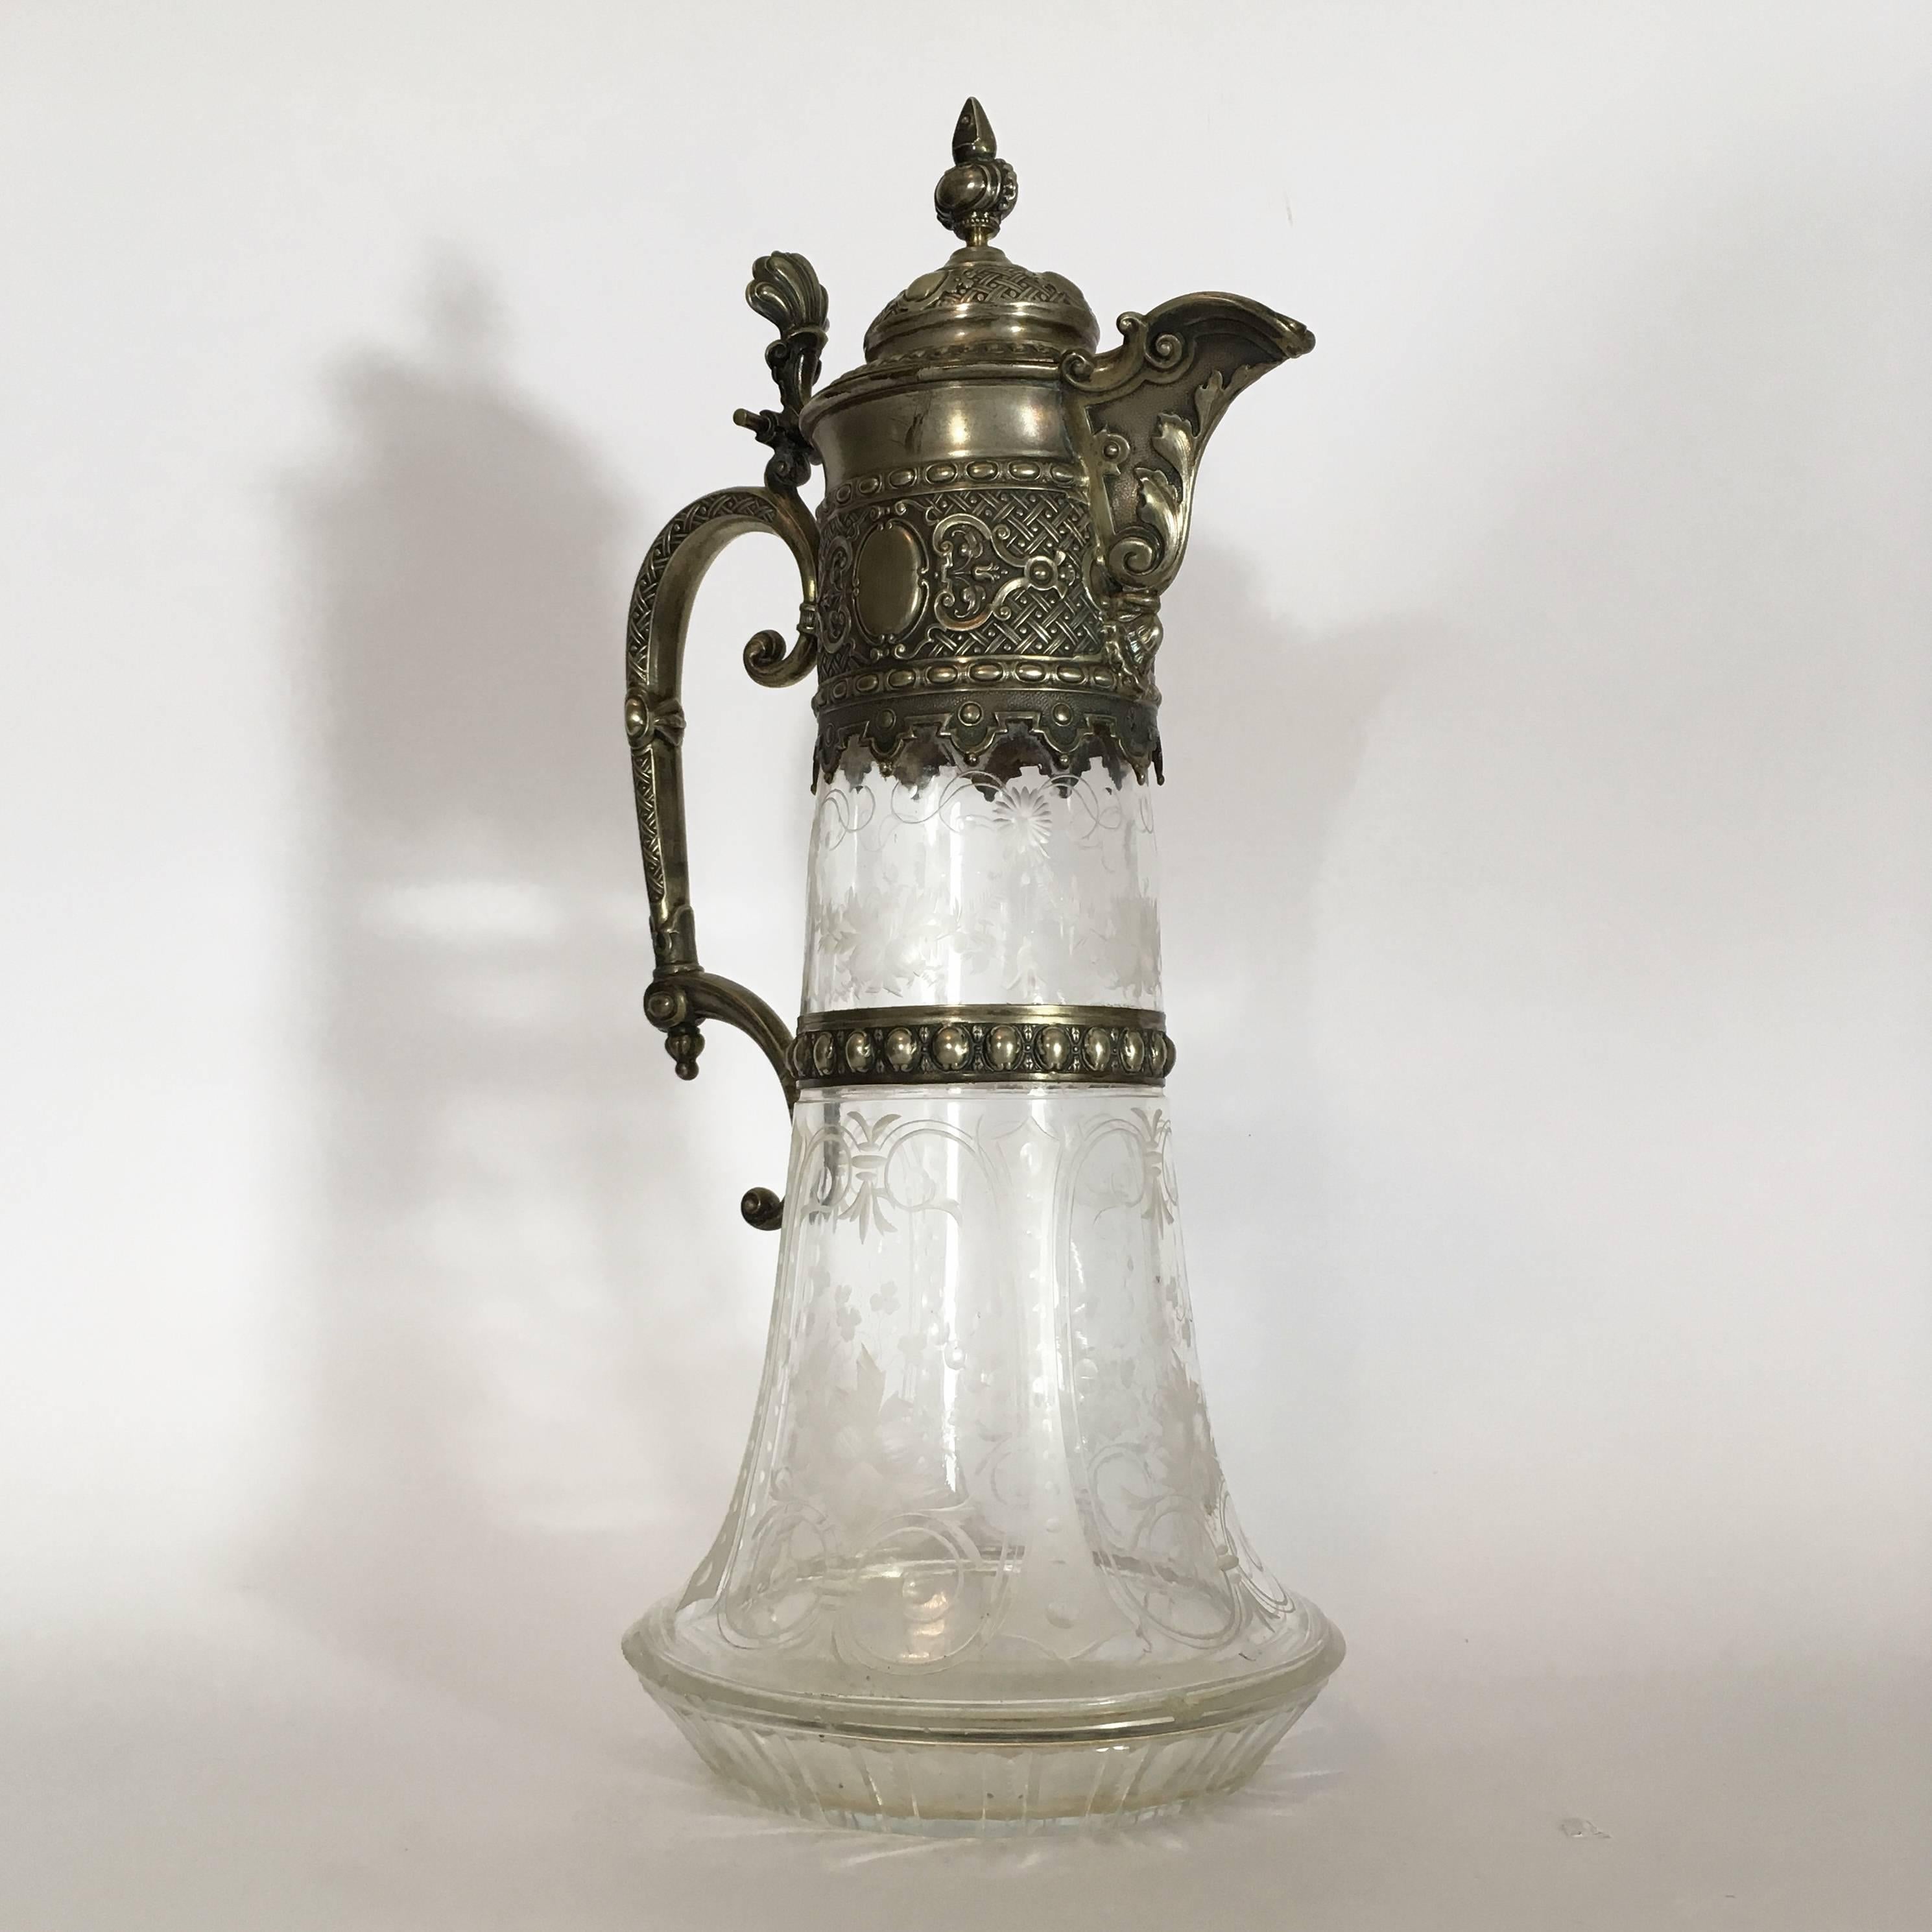 Silvered Italian Late 19th Century Engraved Glass Decanter or Carafe with Mountings For Sale